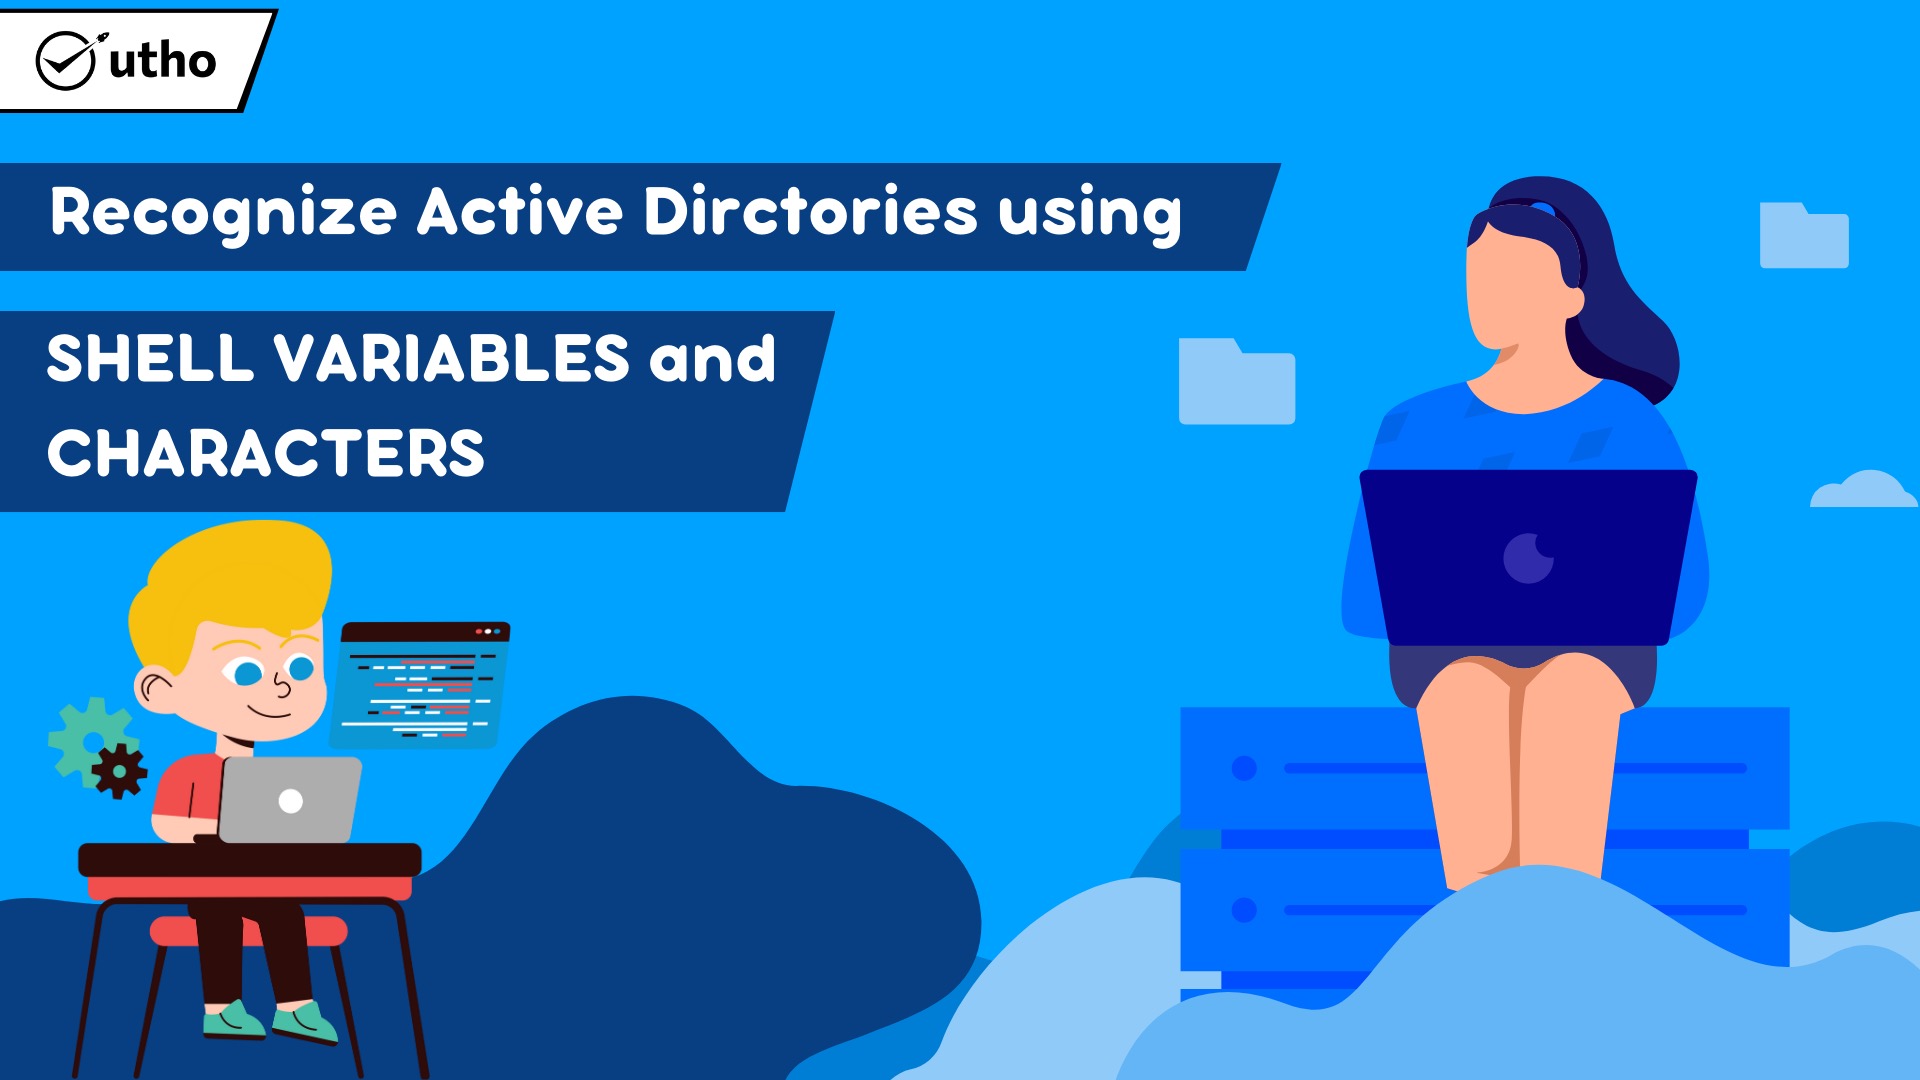 How to Recognize Active Directories Using Shell Variables and Characters